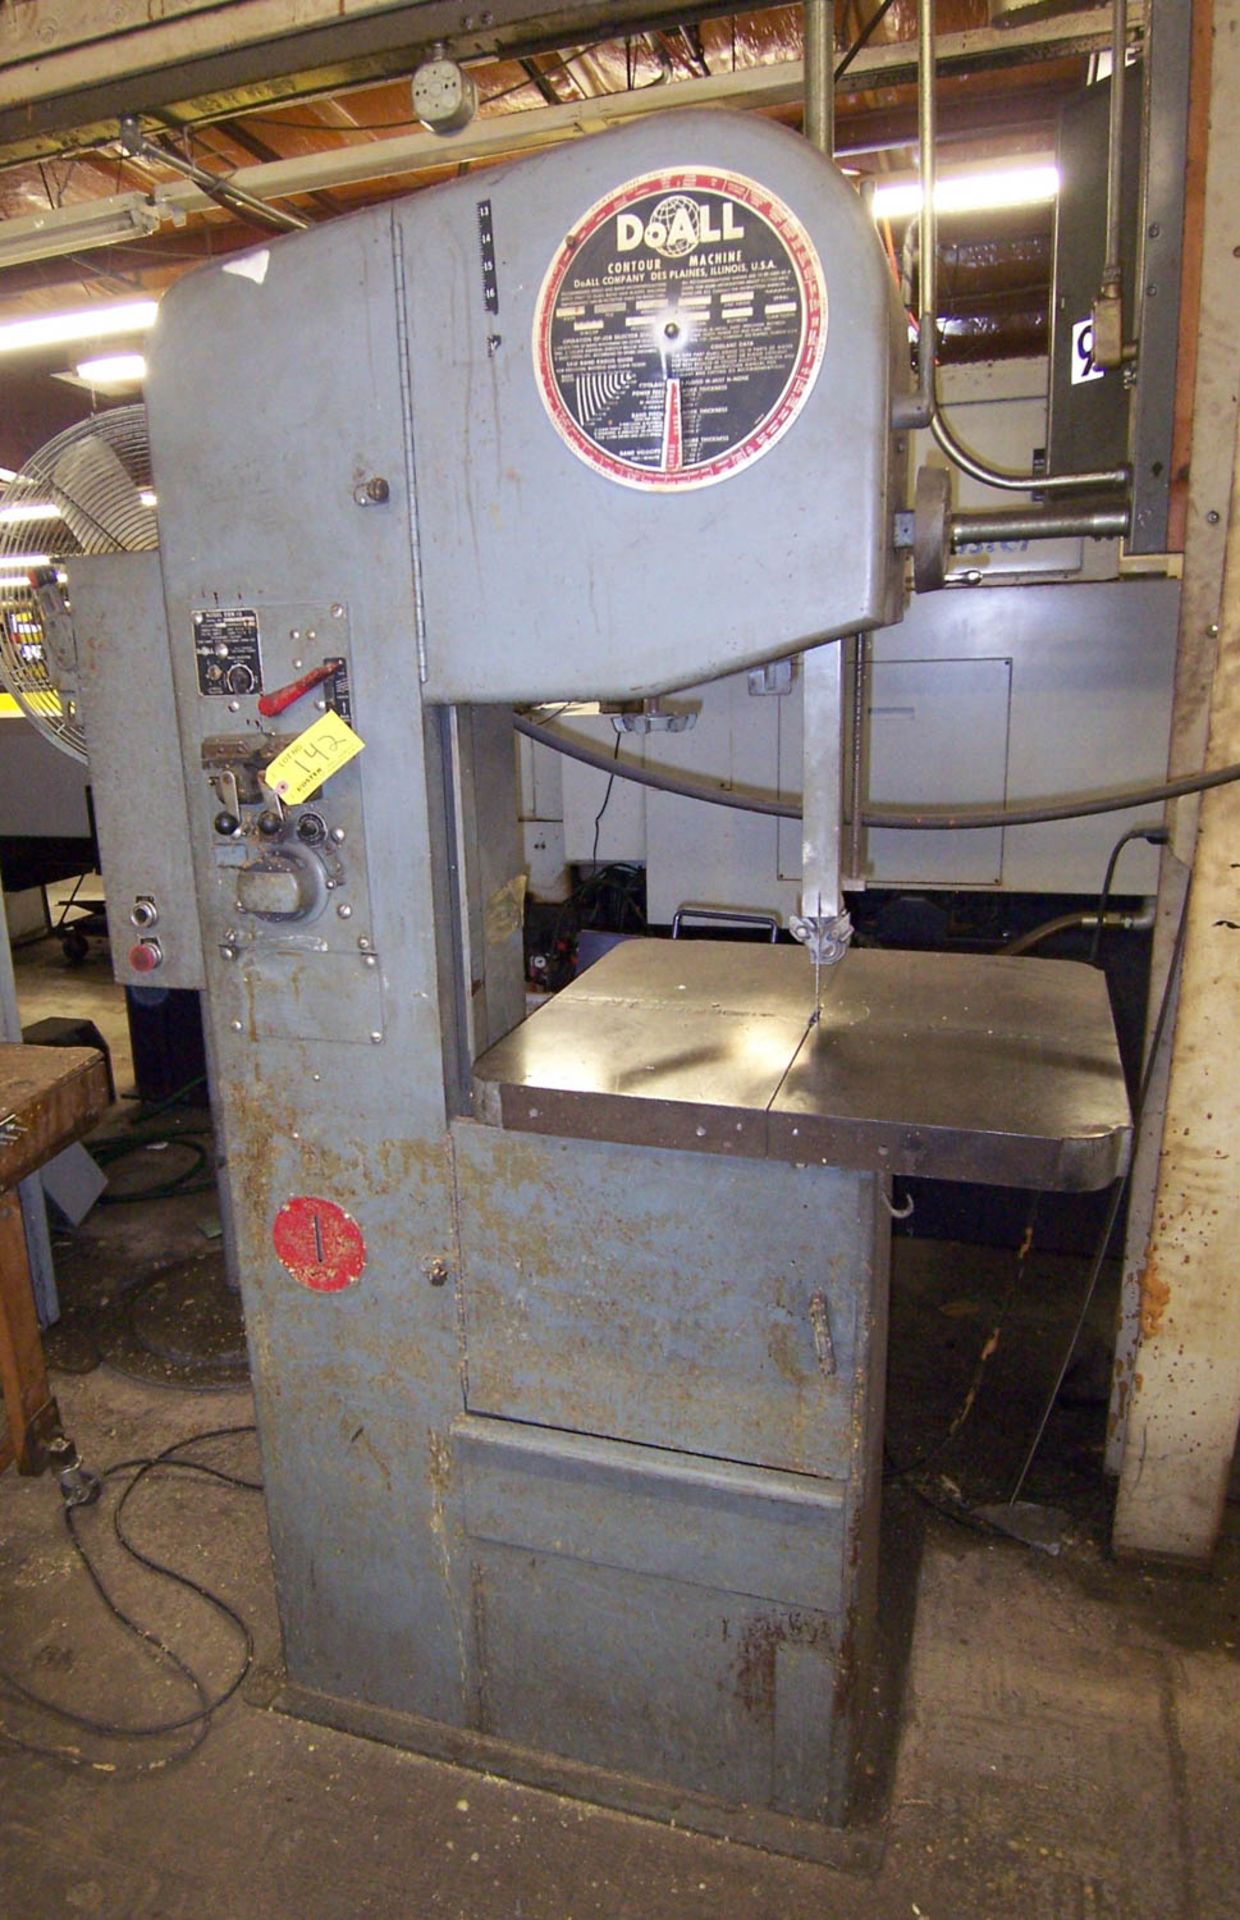 16" DoALL MDL. 1612 VERTICAL BANDSAW, WITH BUTT WELDING ATTACHMENT, 5200 FPM, S/N: 237-72343